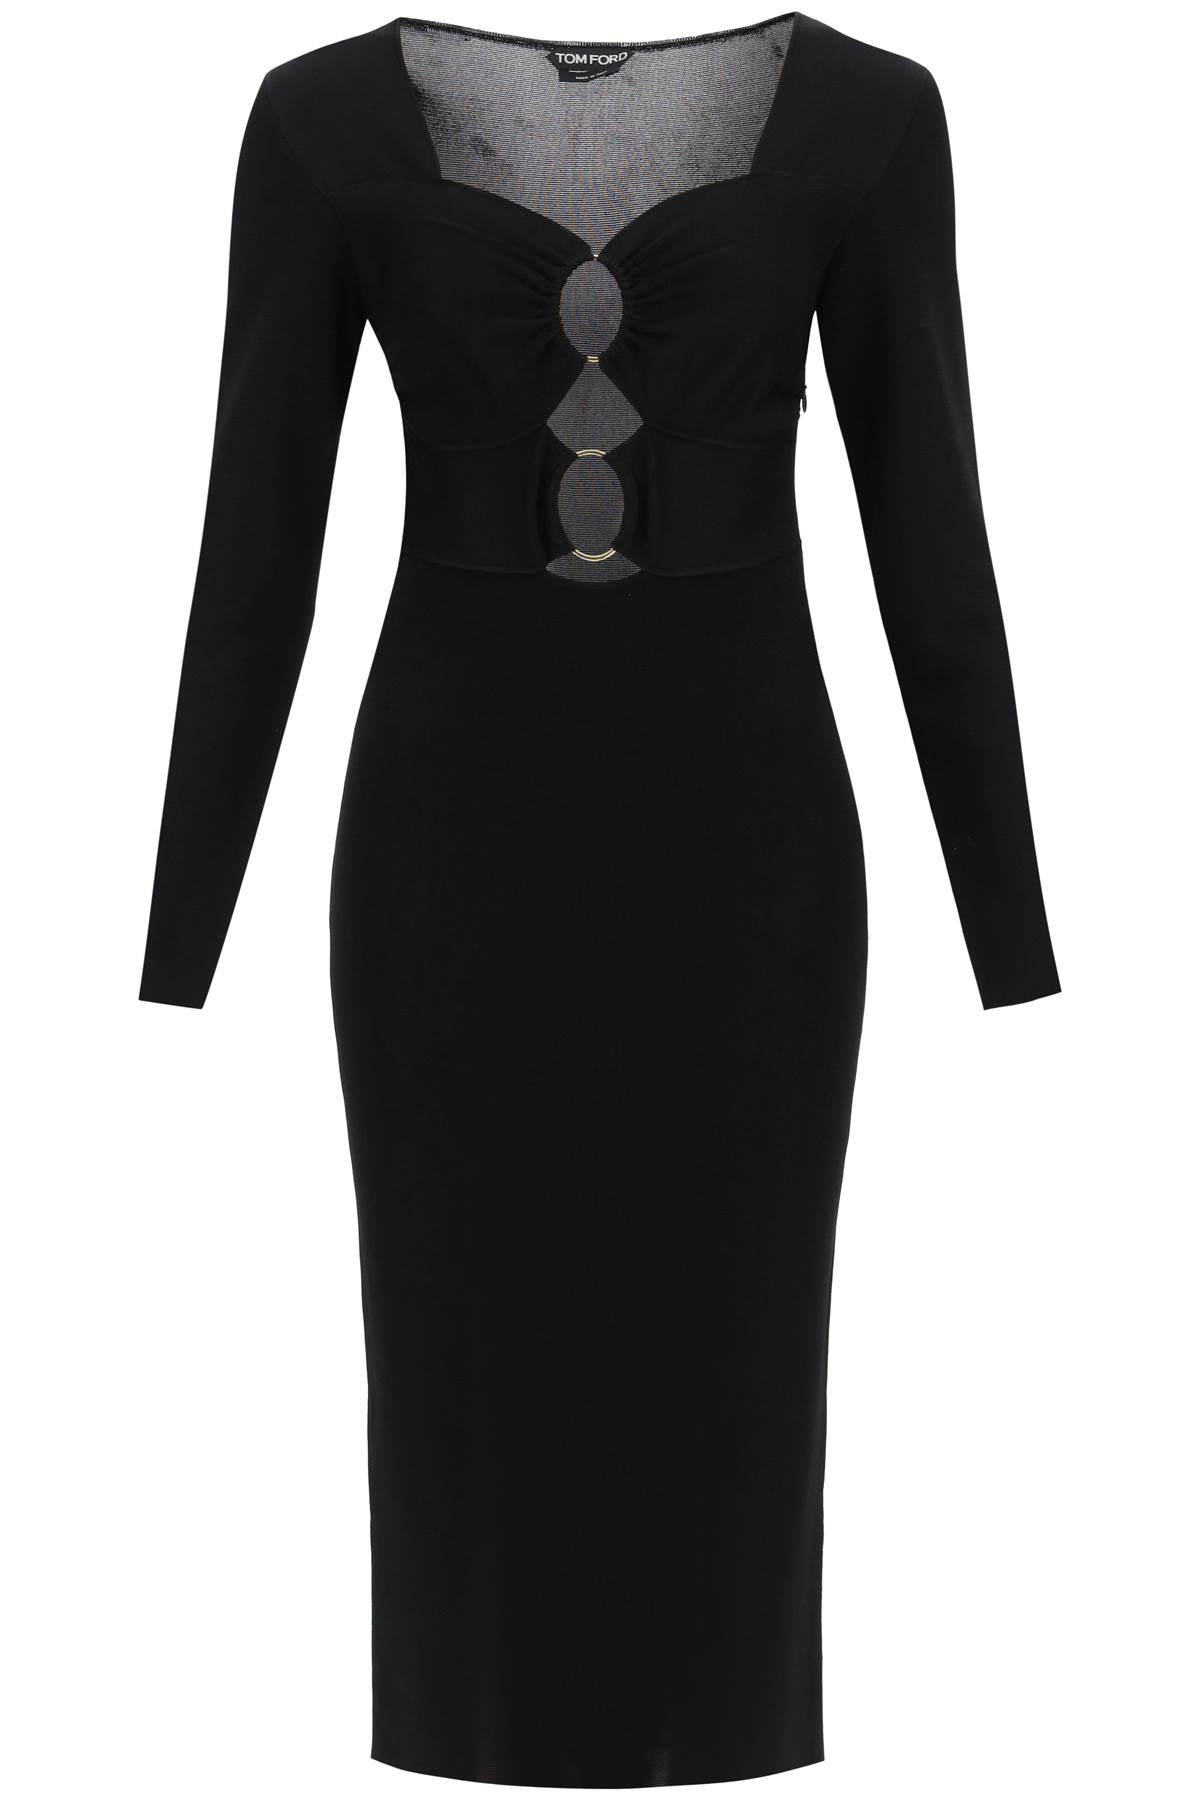 Tom ford knitted midi dress with cut-outs-0